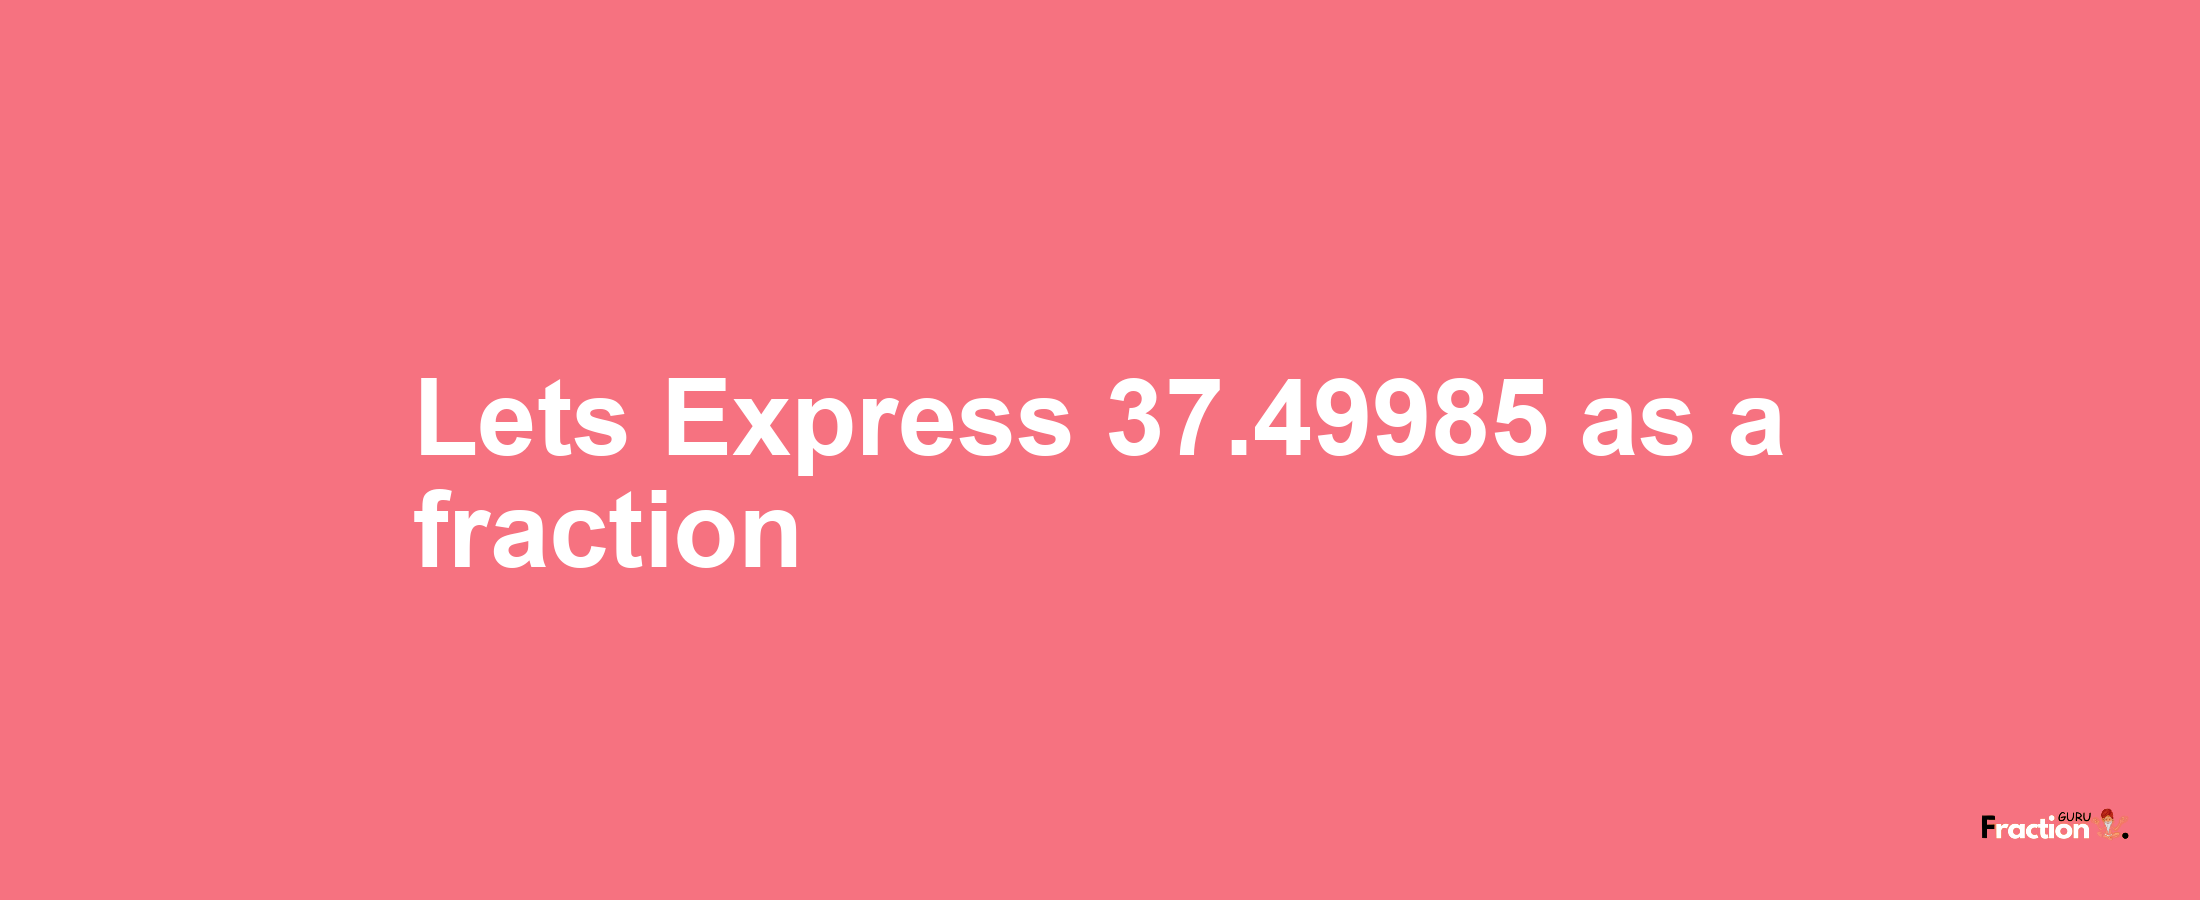 Lets Express 37.49985 as afraction